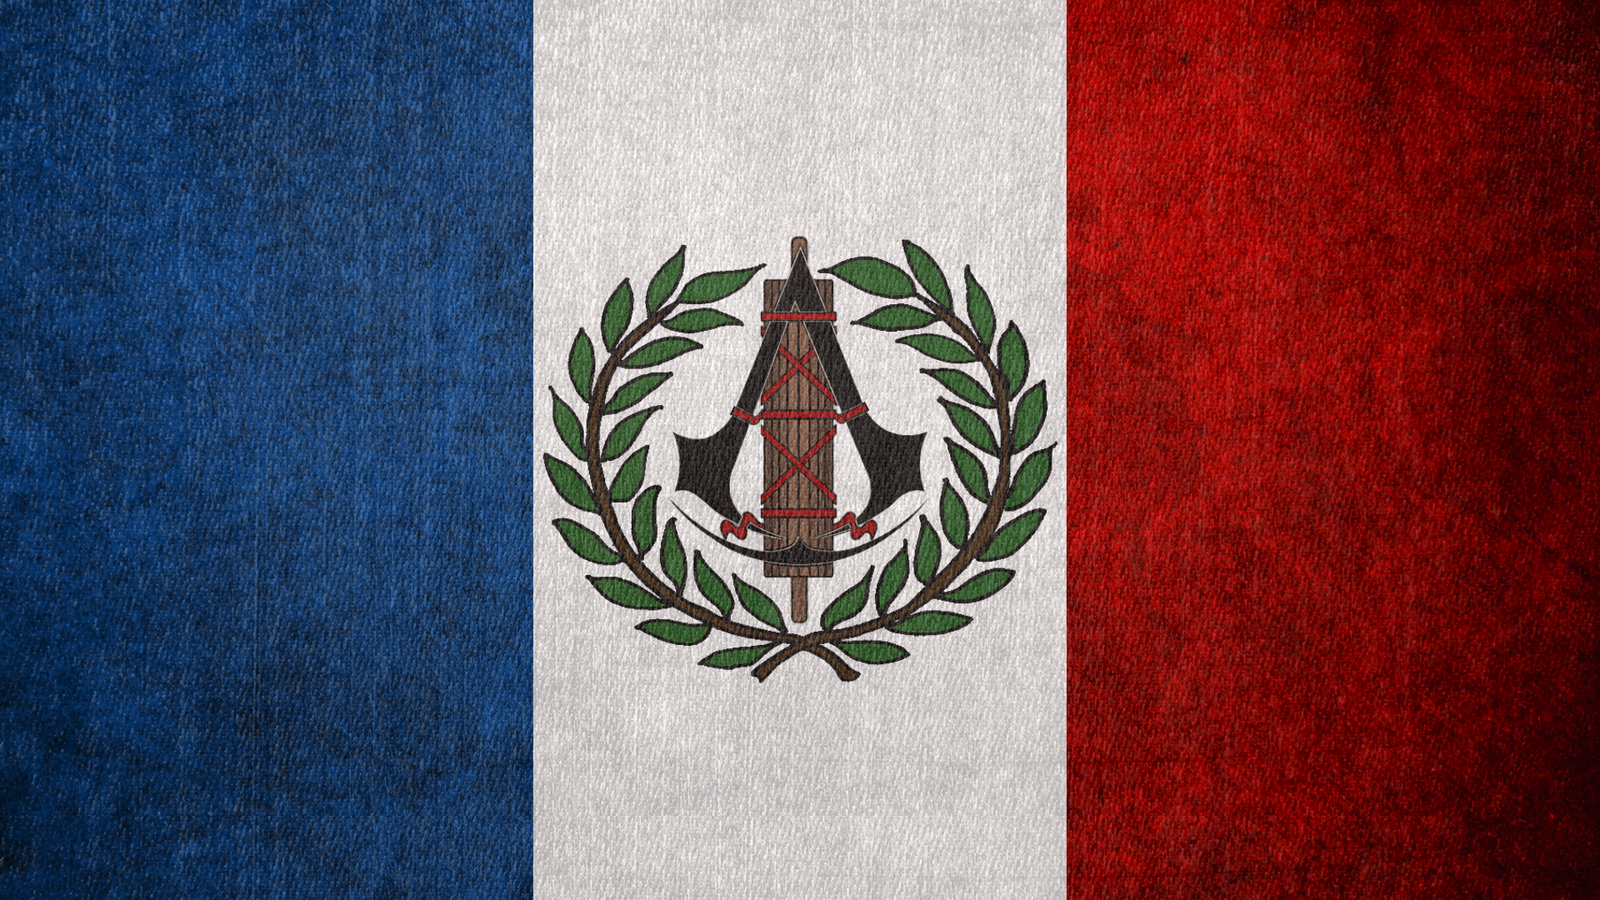 Assassin's Creed: French Revolutionary Flag by okiir on DeviantArt